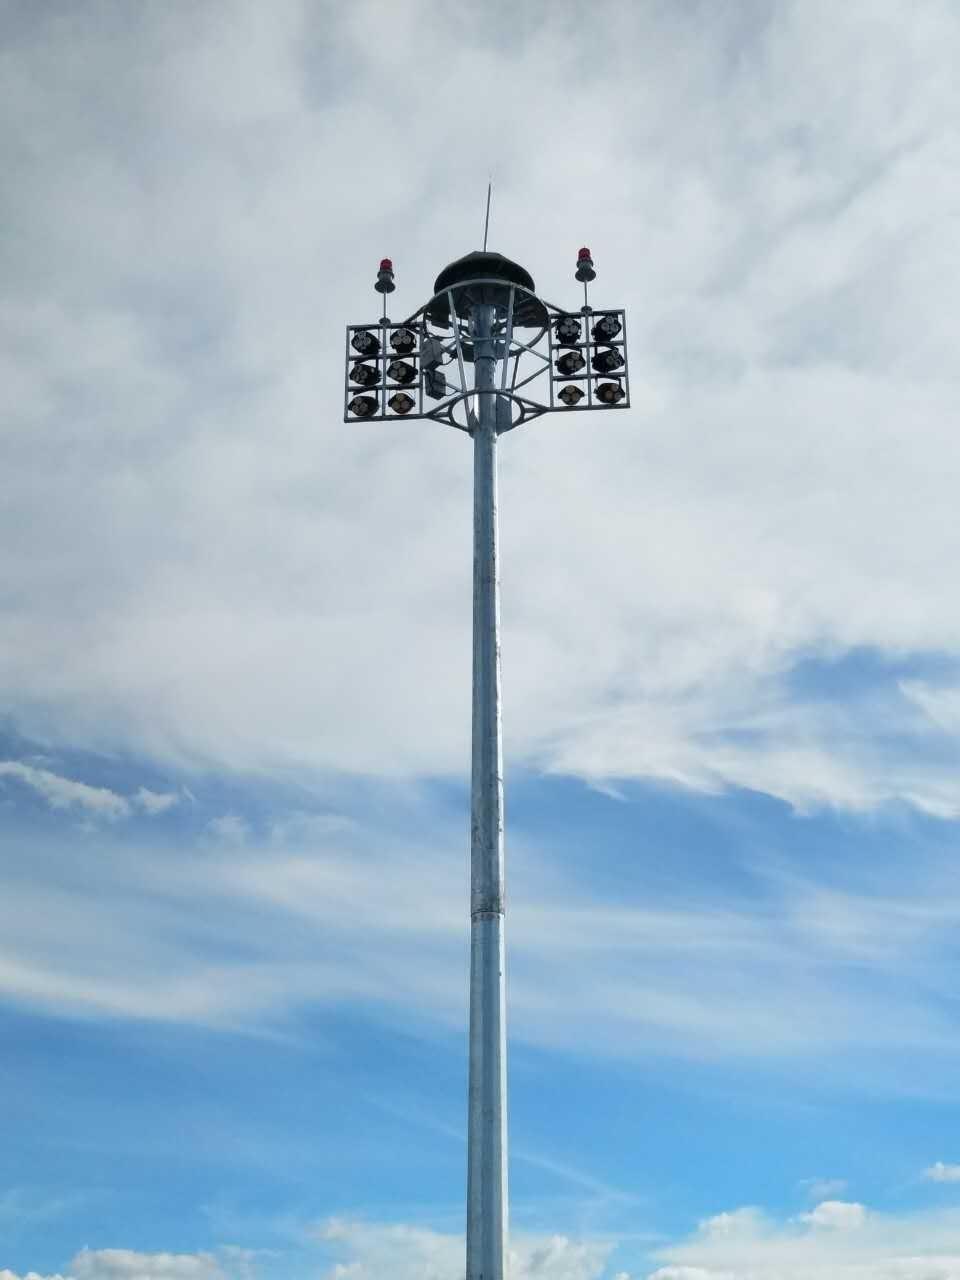 Baode Lights Outdoor 30m 2000W High Pressure Sodium High Mast Lighting for Airport